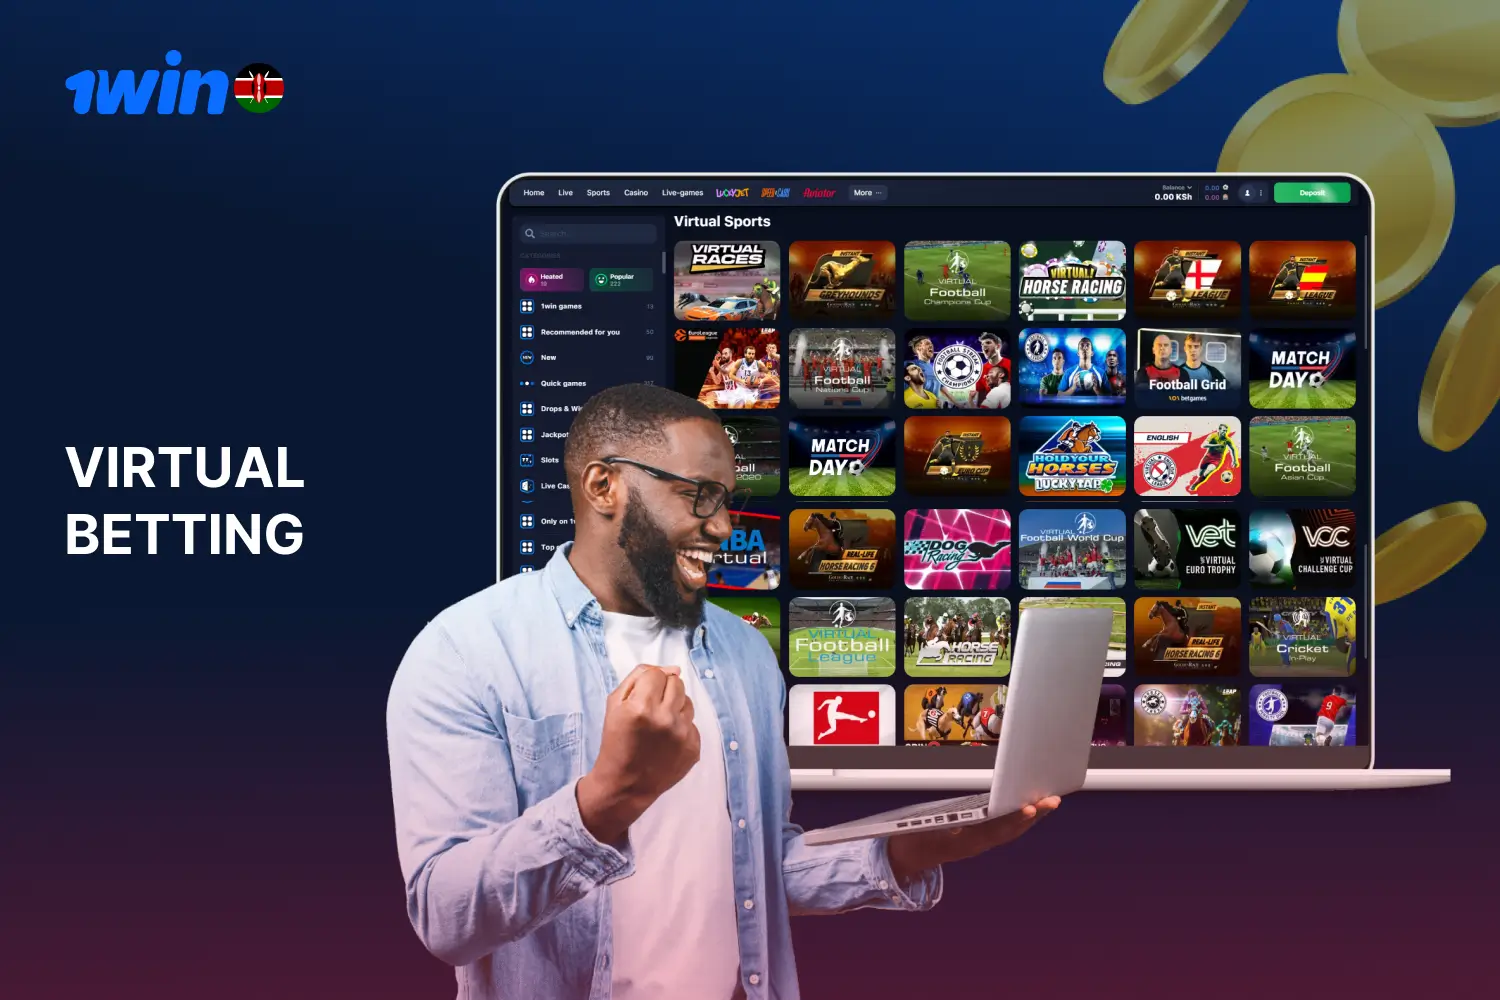 Virtual betting at 1win is highly regarded by bettors from Kenya